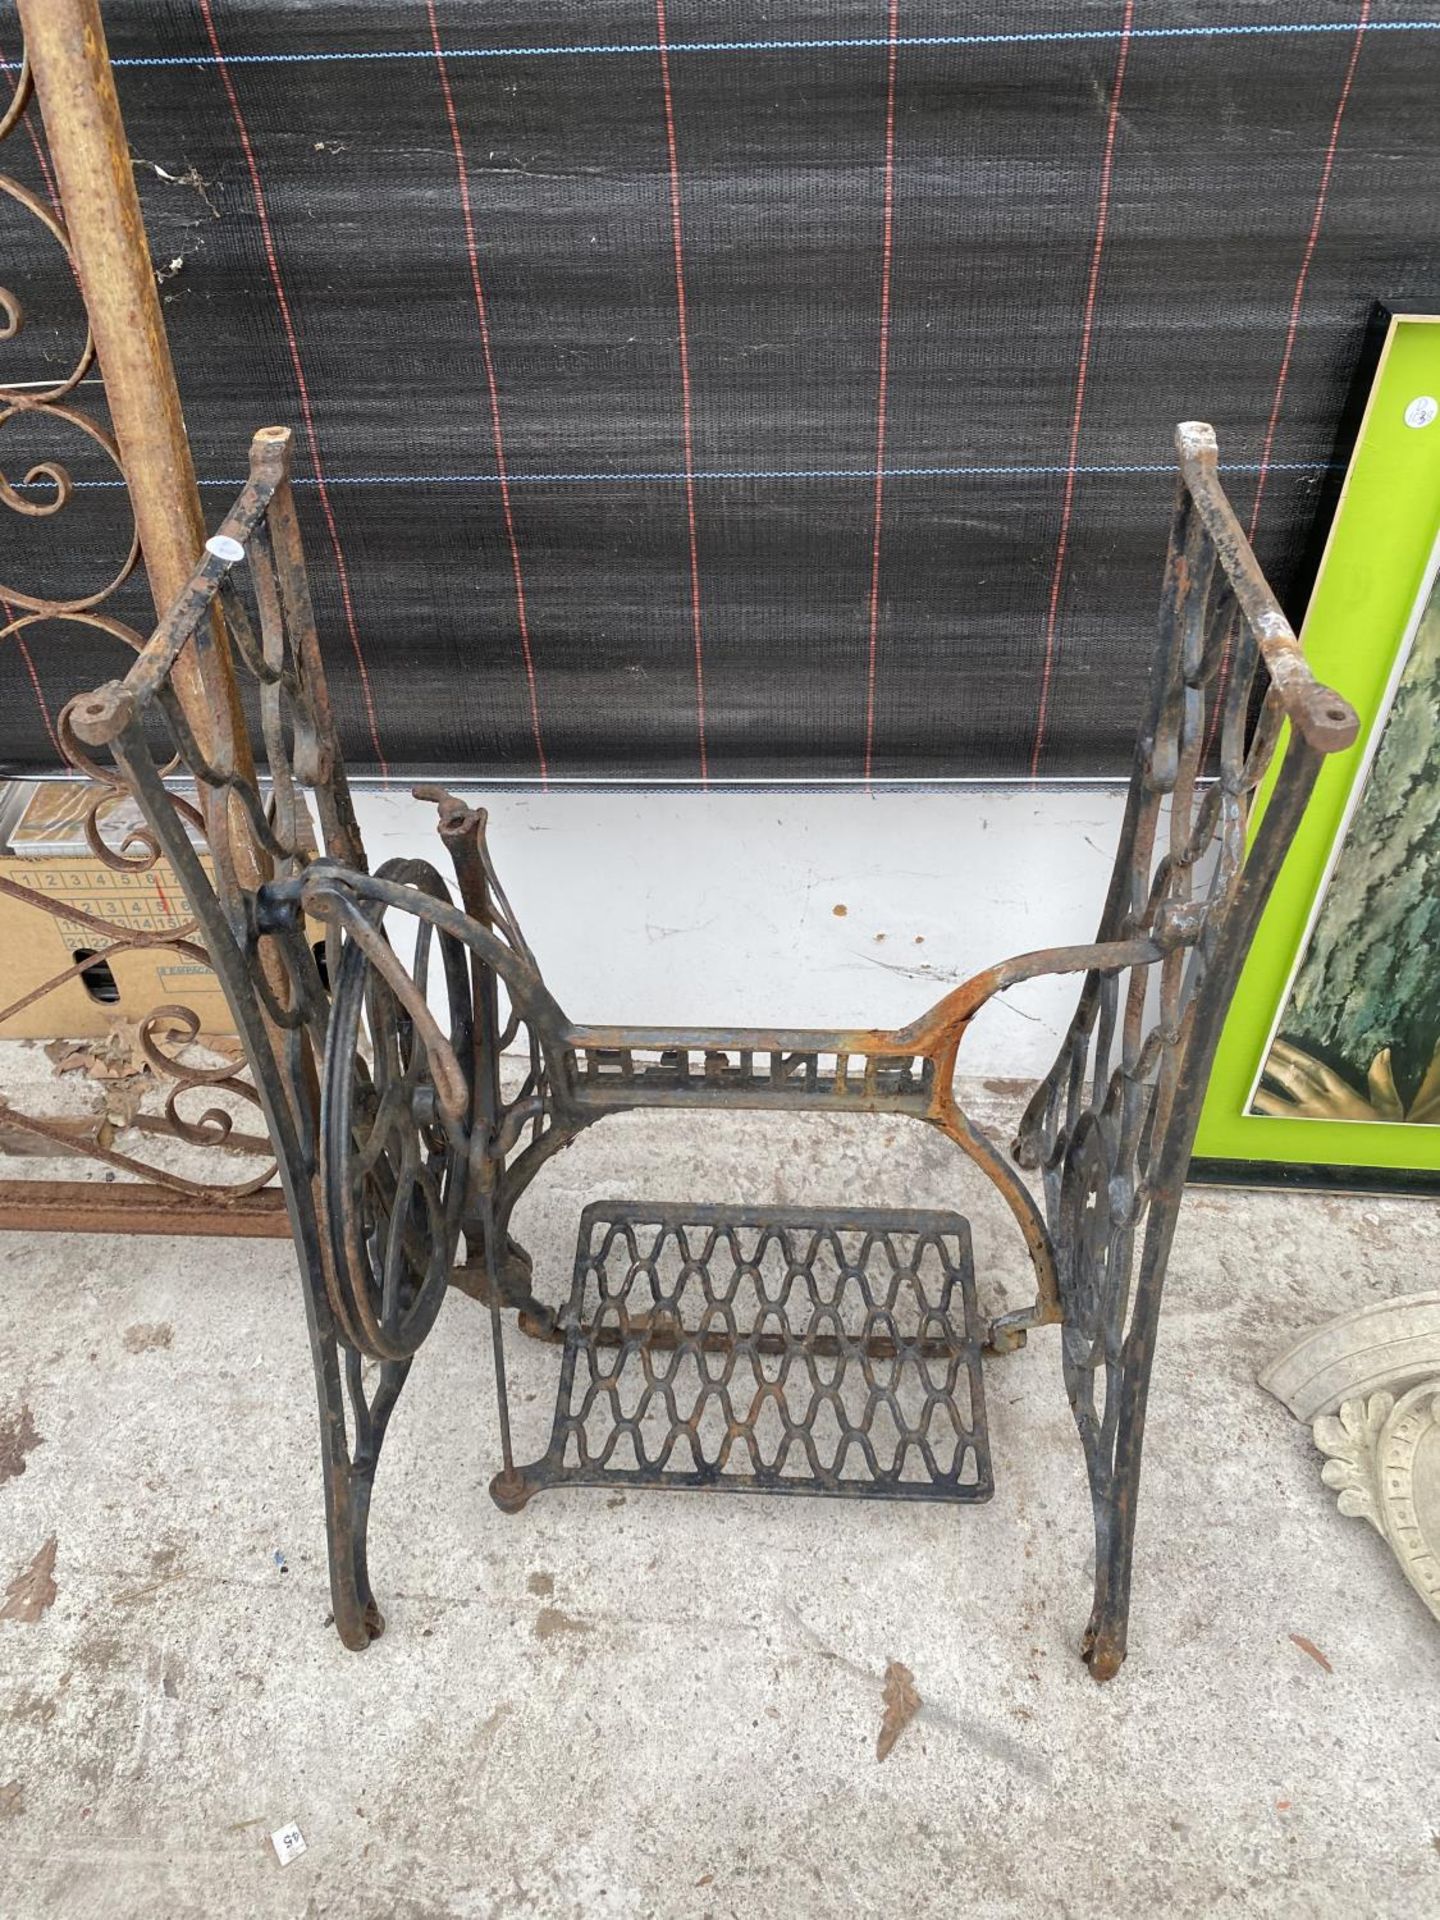 A SECTION OF DECORATIVE WROUGHT IRON RAILING AND A SINGER TREADLE BASE - Image 2 of 5